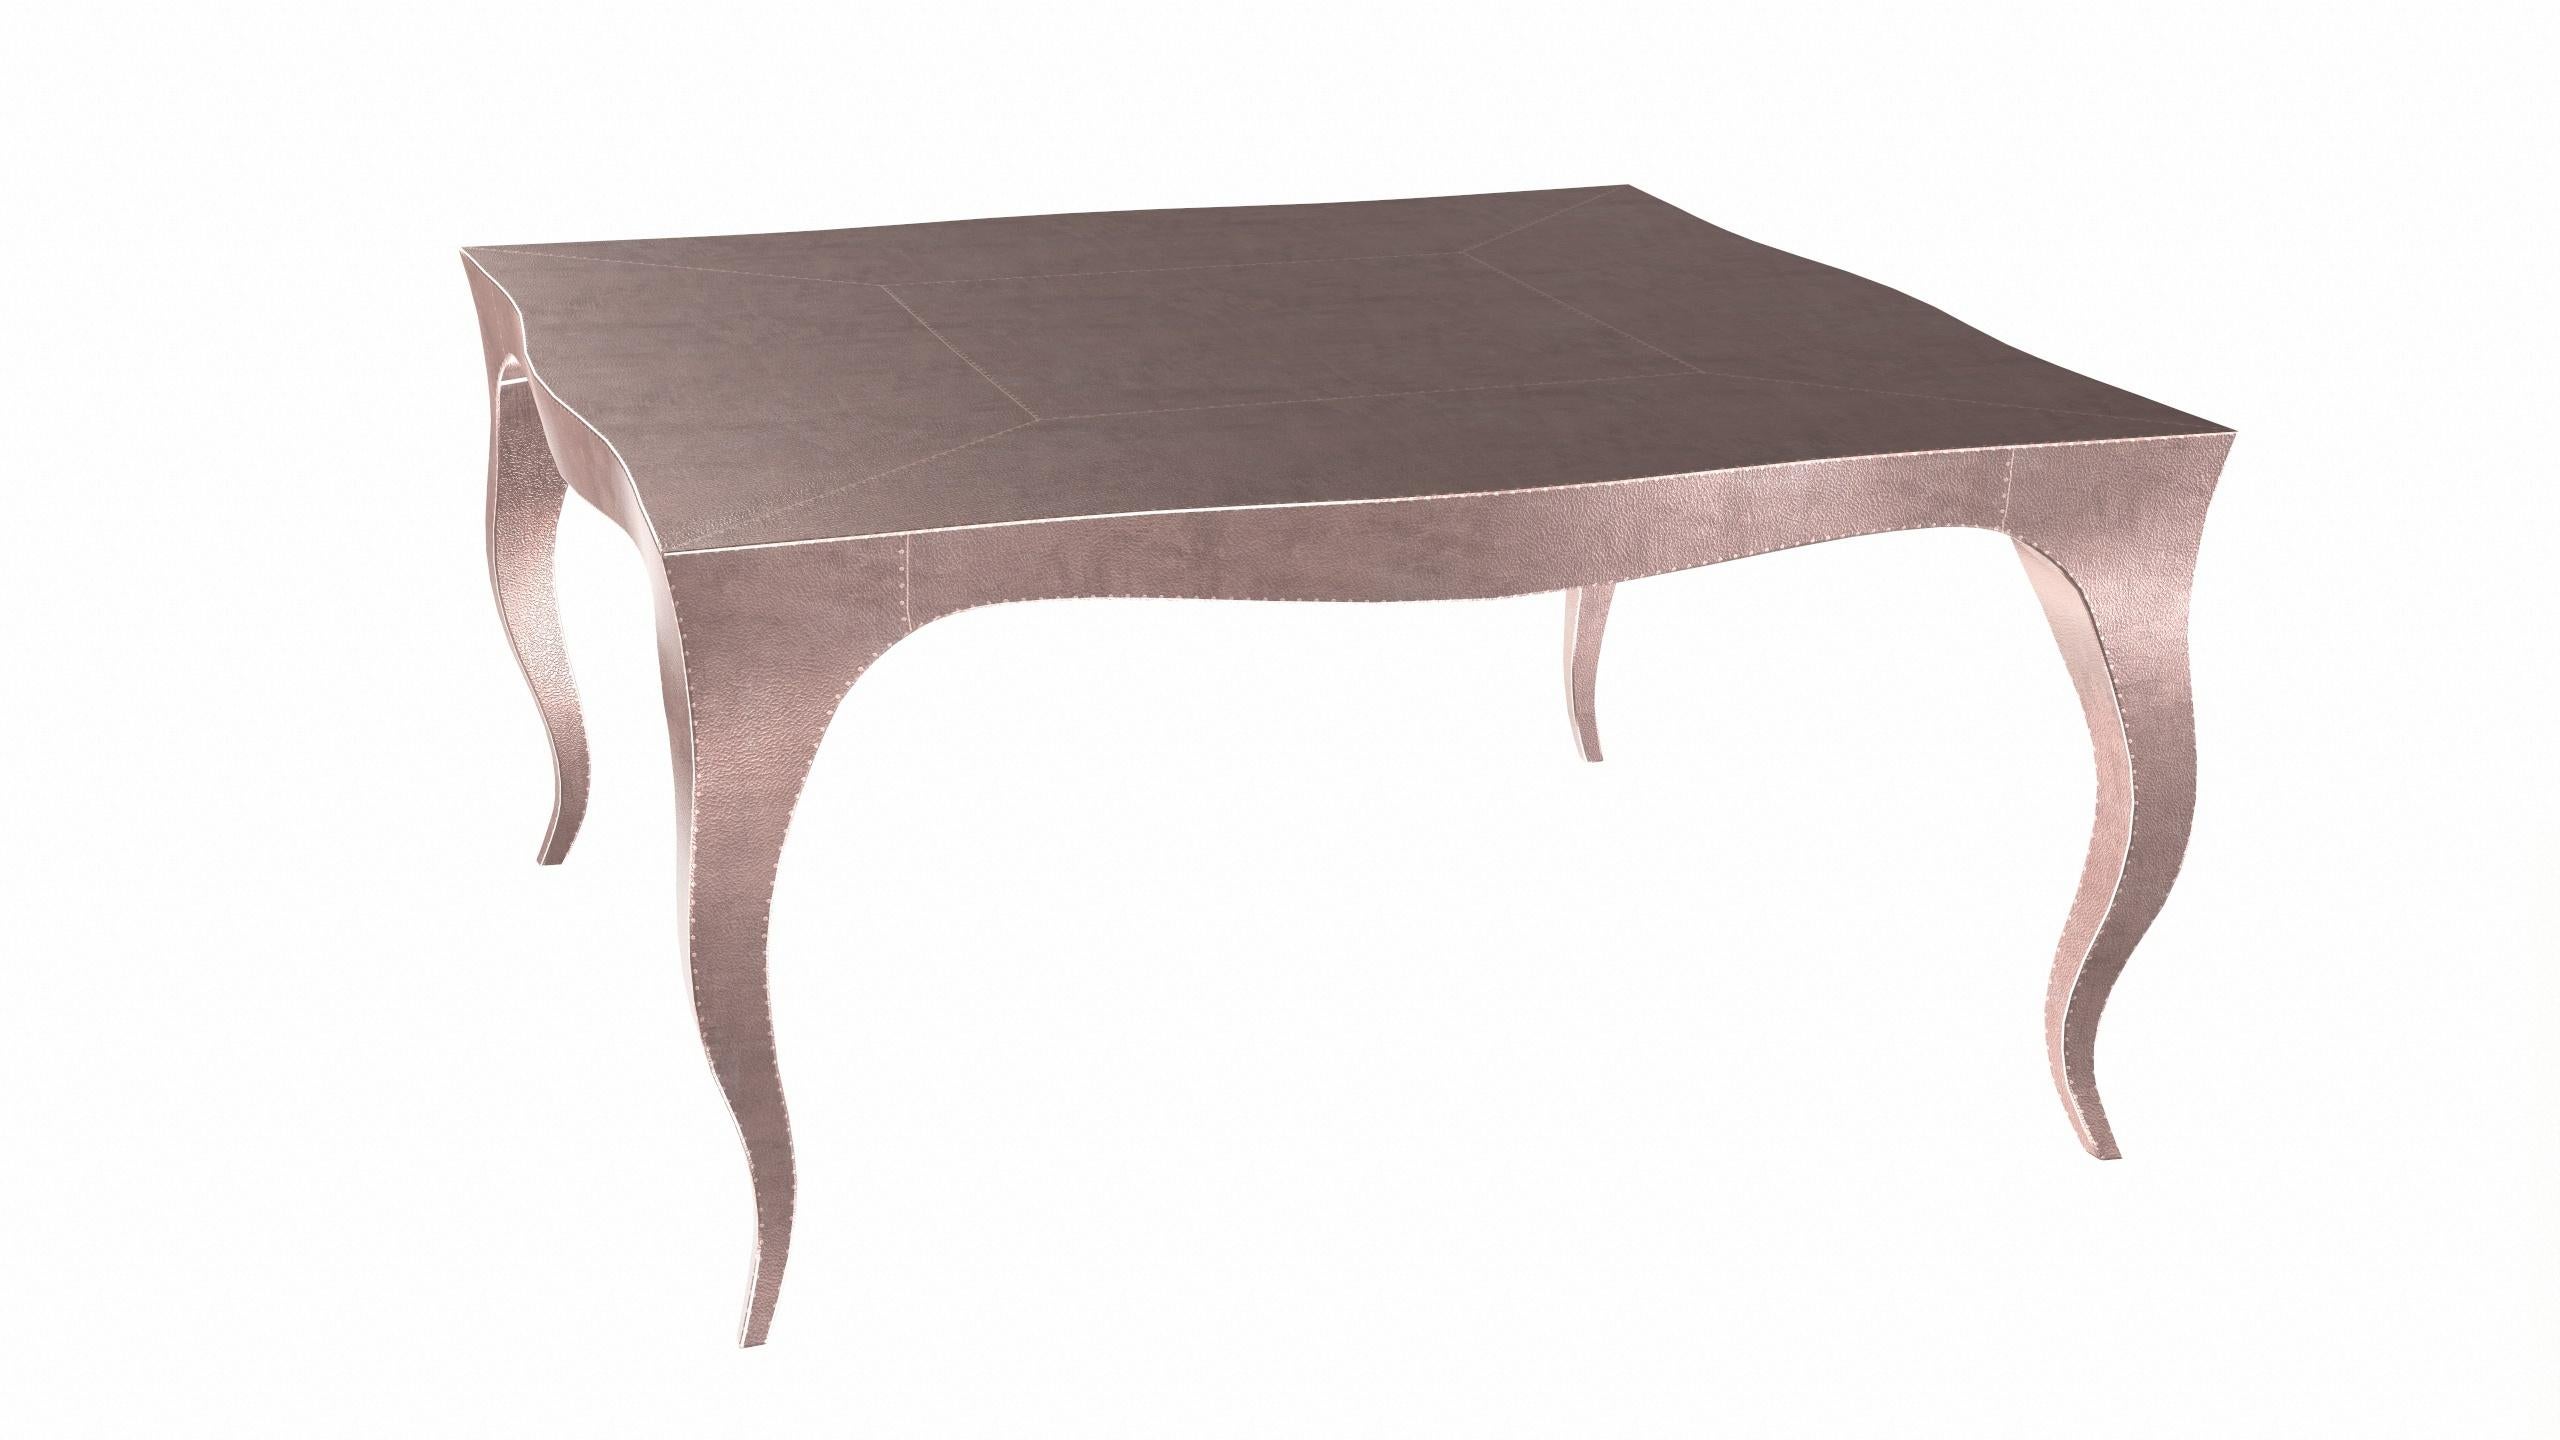 Metal Louise Art Deco Industrial and Work Tables Fine Hammered Copper by Paul Mathieu For Sale